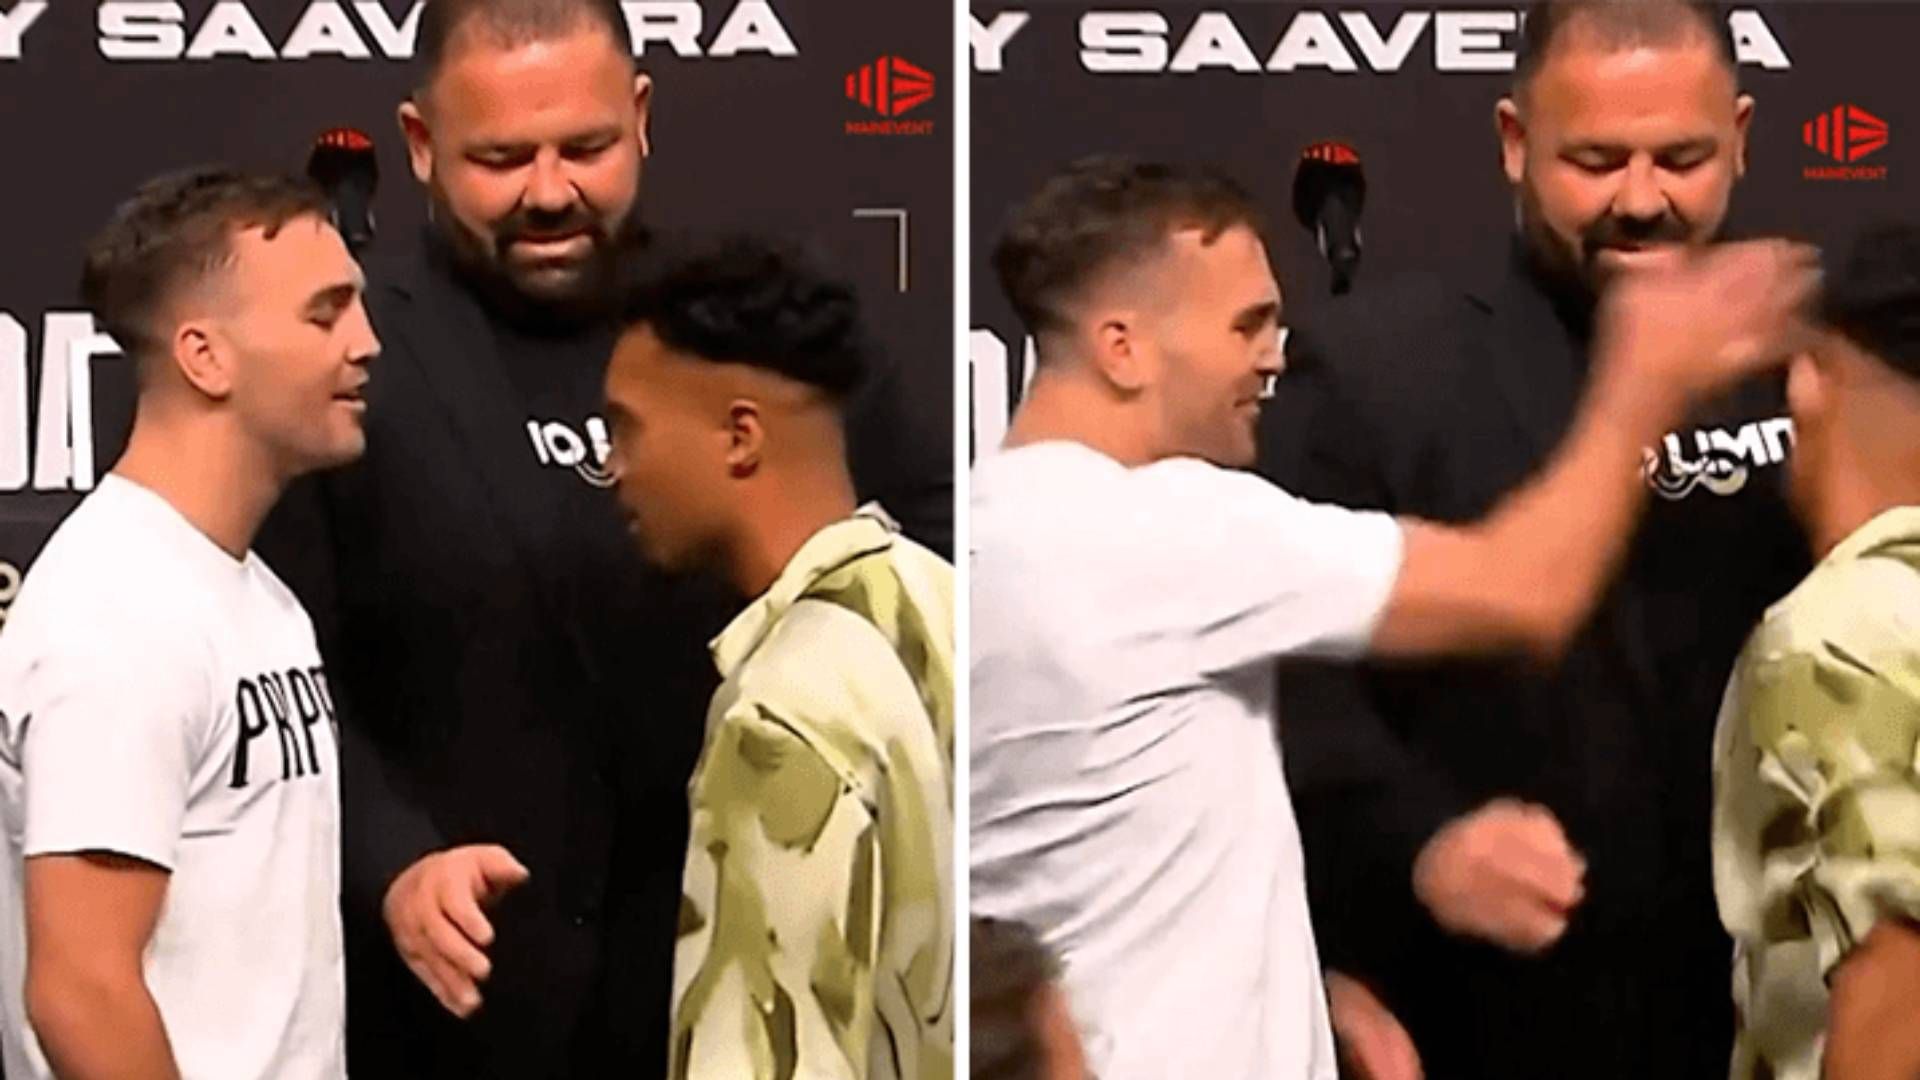 'Biggest clown in boxing': Sam Goodman slaps 'delusional' opponent at fiery presser